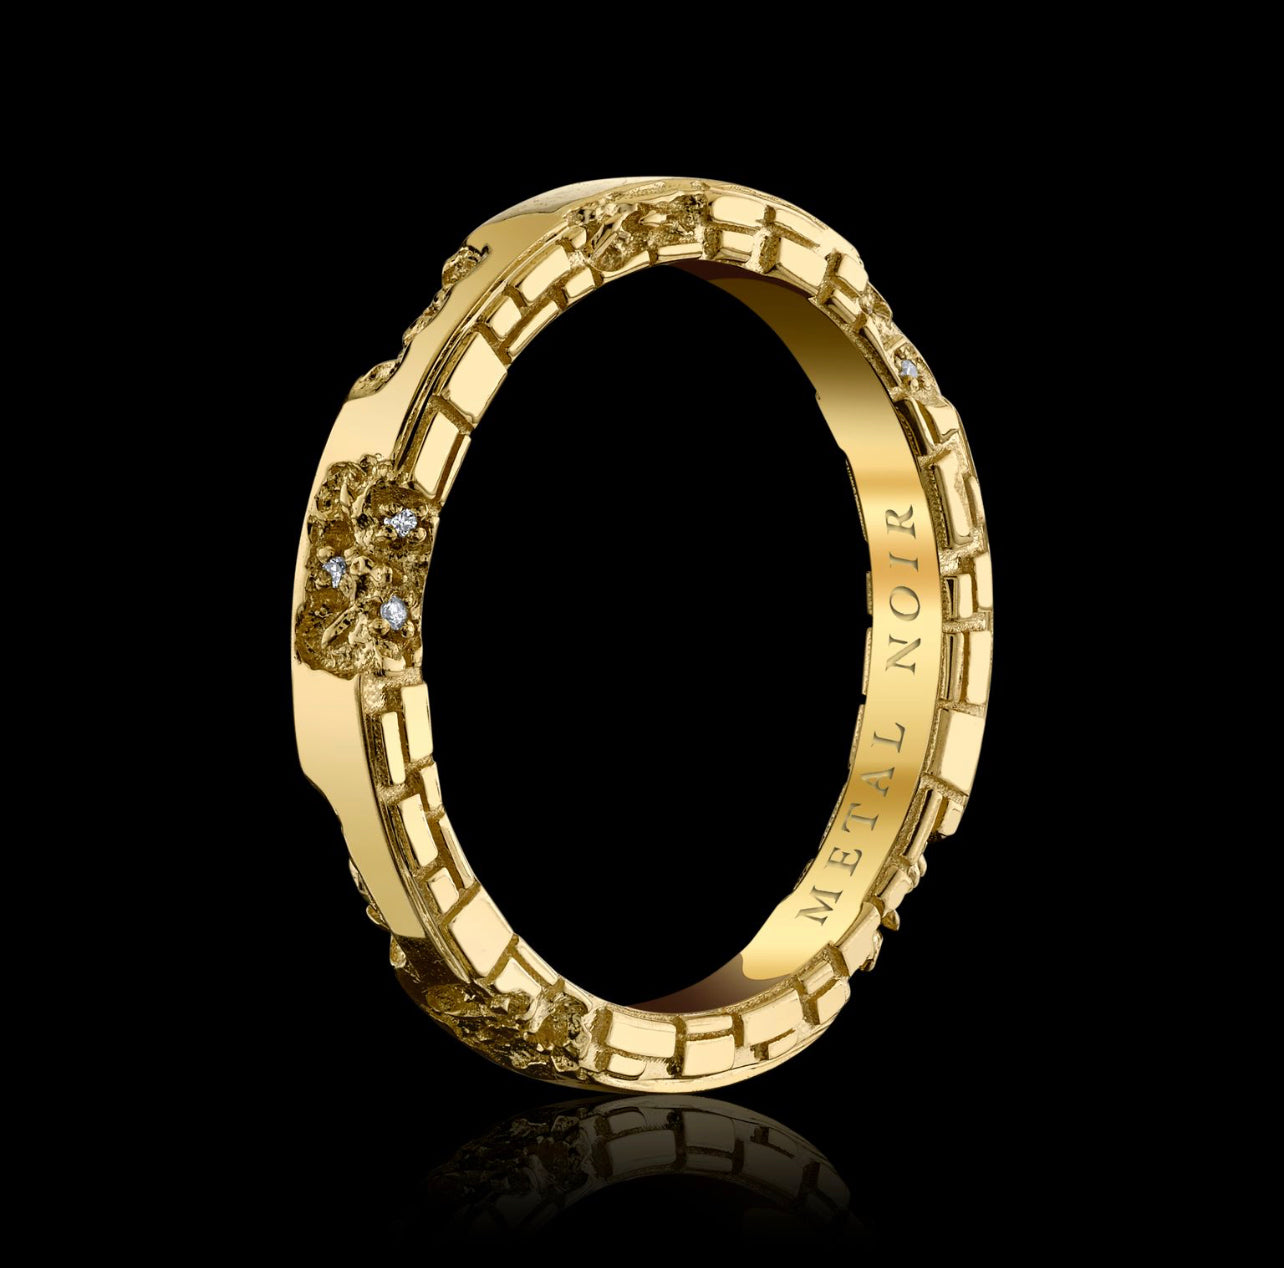 ‘Eroded Architecture’ ULTRATHIN Ring in solid 18k yellow gold • Edition of 50